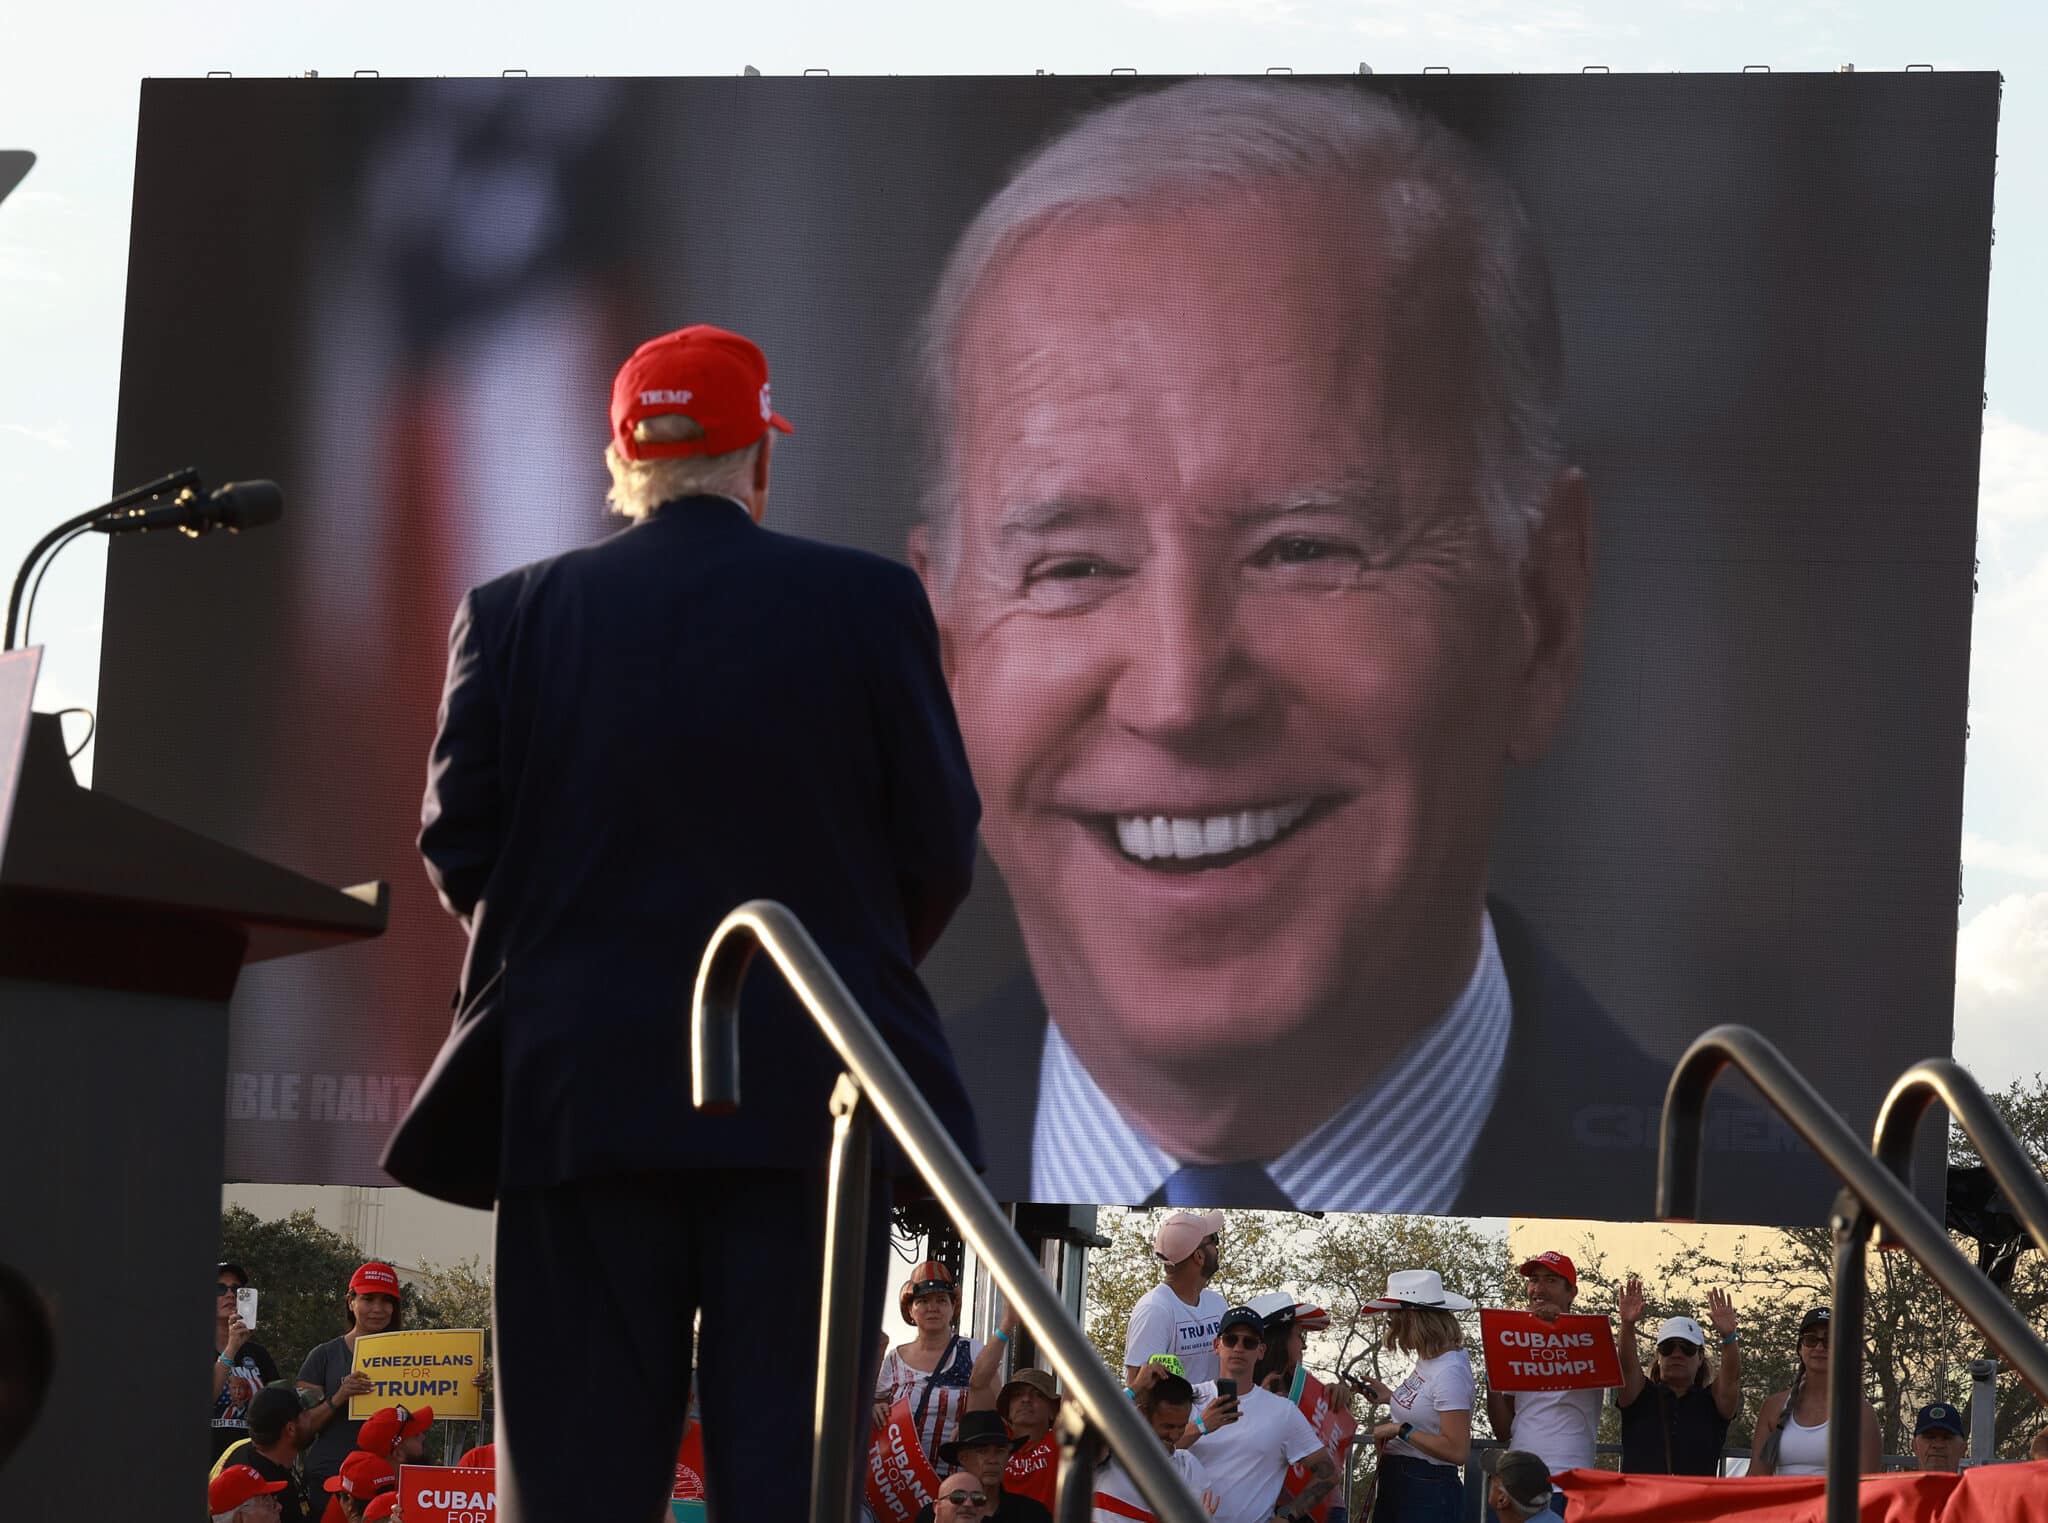 MIAMI, FLORIDA - NOVEMBER 06: Former U.S. President Donald Trump watches a video of President Joe Biden playing during a rally for Sen. Marco Rubio (R-FL) at the Miami-Dade Country Fair and Exposition on November 6, 2022 in Miami, Florida. Rubio faces U.S. Rep. Val Demings (D-FL) in his reelection bid in Tuesday's general election.  (Photo by Joe Raedle/Getty Images)